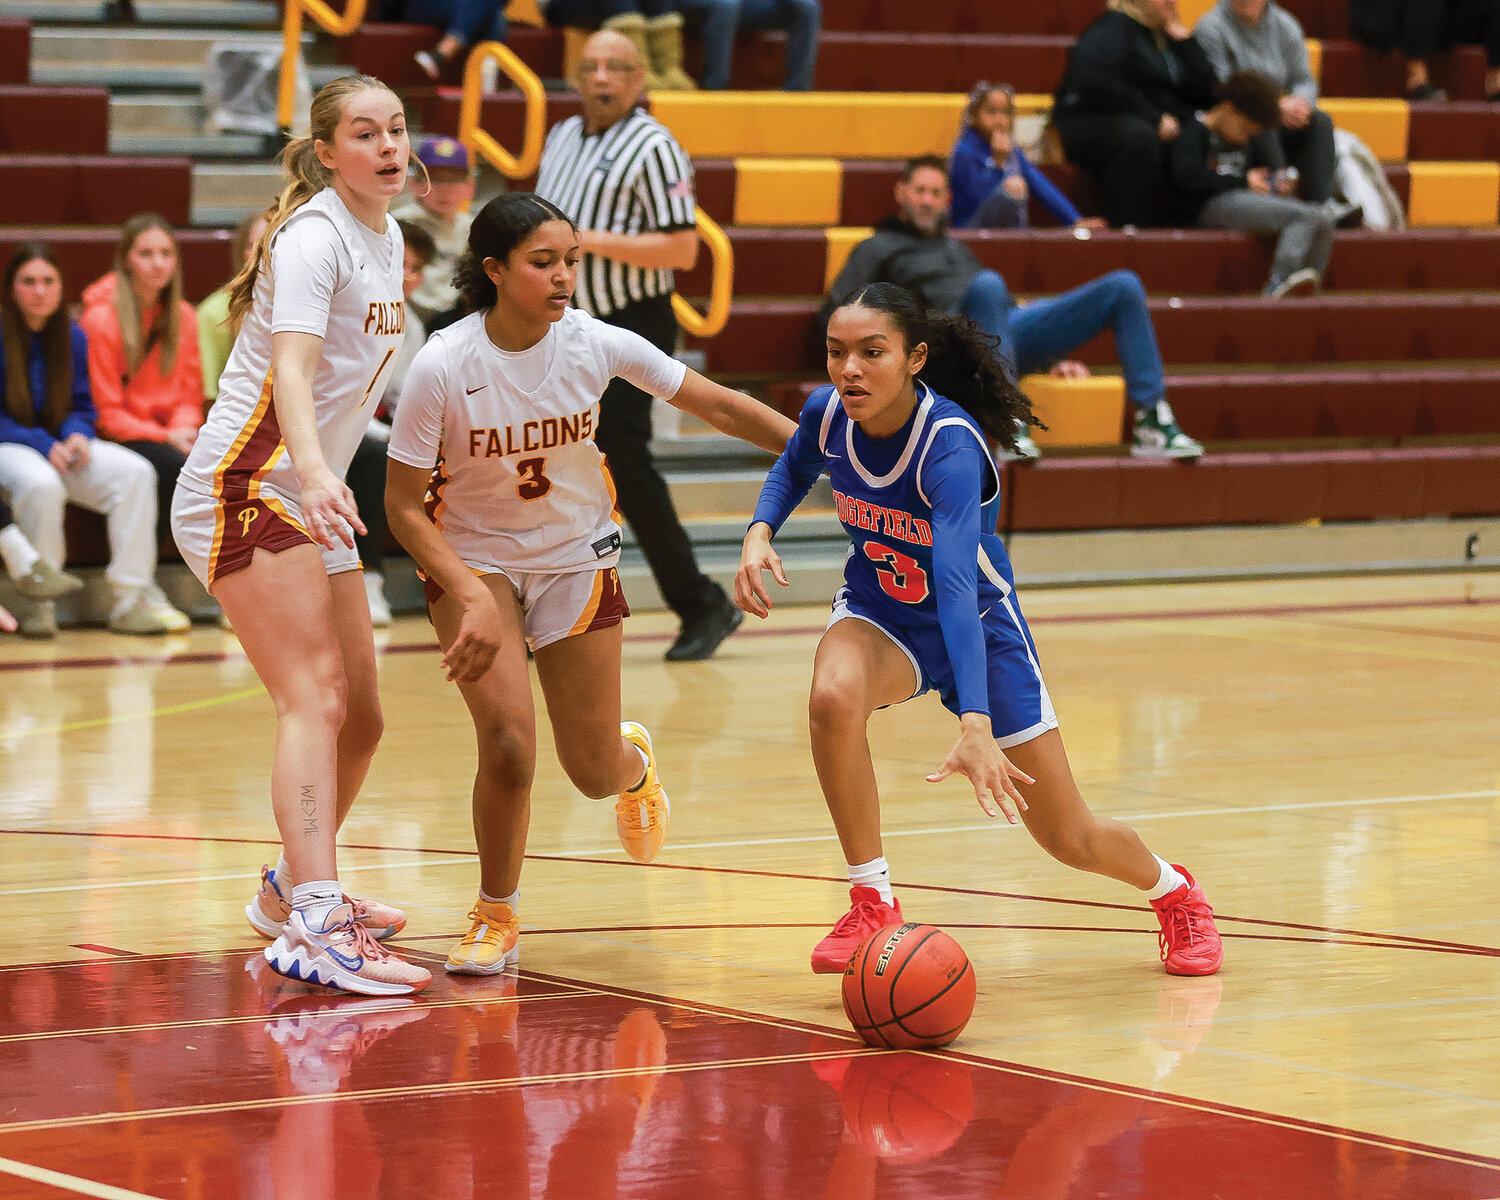 Ridgefield's Savannah Chanda dribbles the ball in the offensive zone against the Prairie Falcons during a season-opening 47-39 win on Wednesday, Nov. 29.